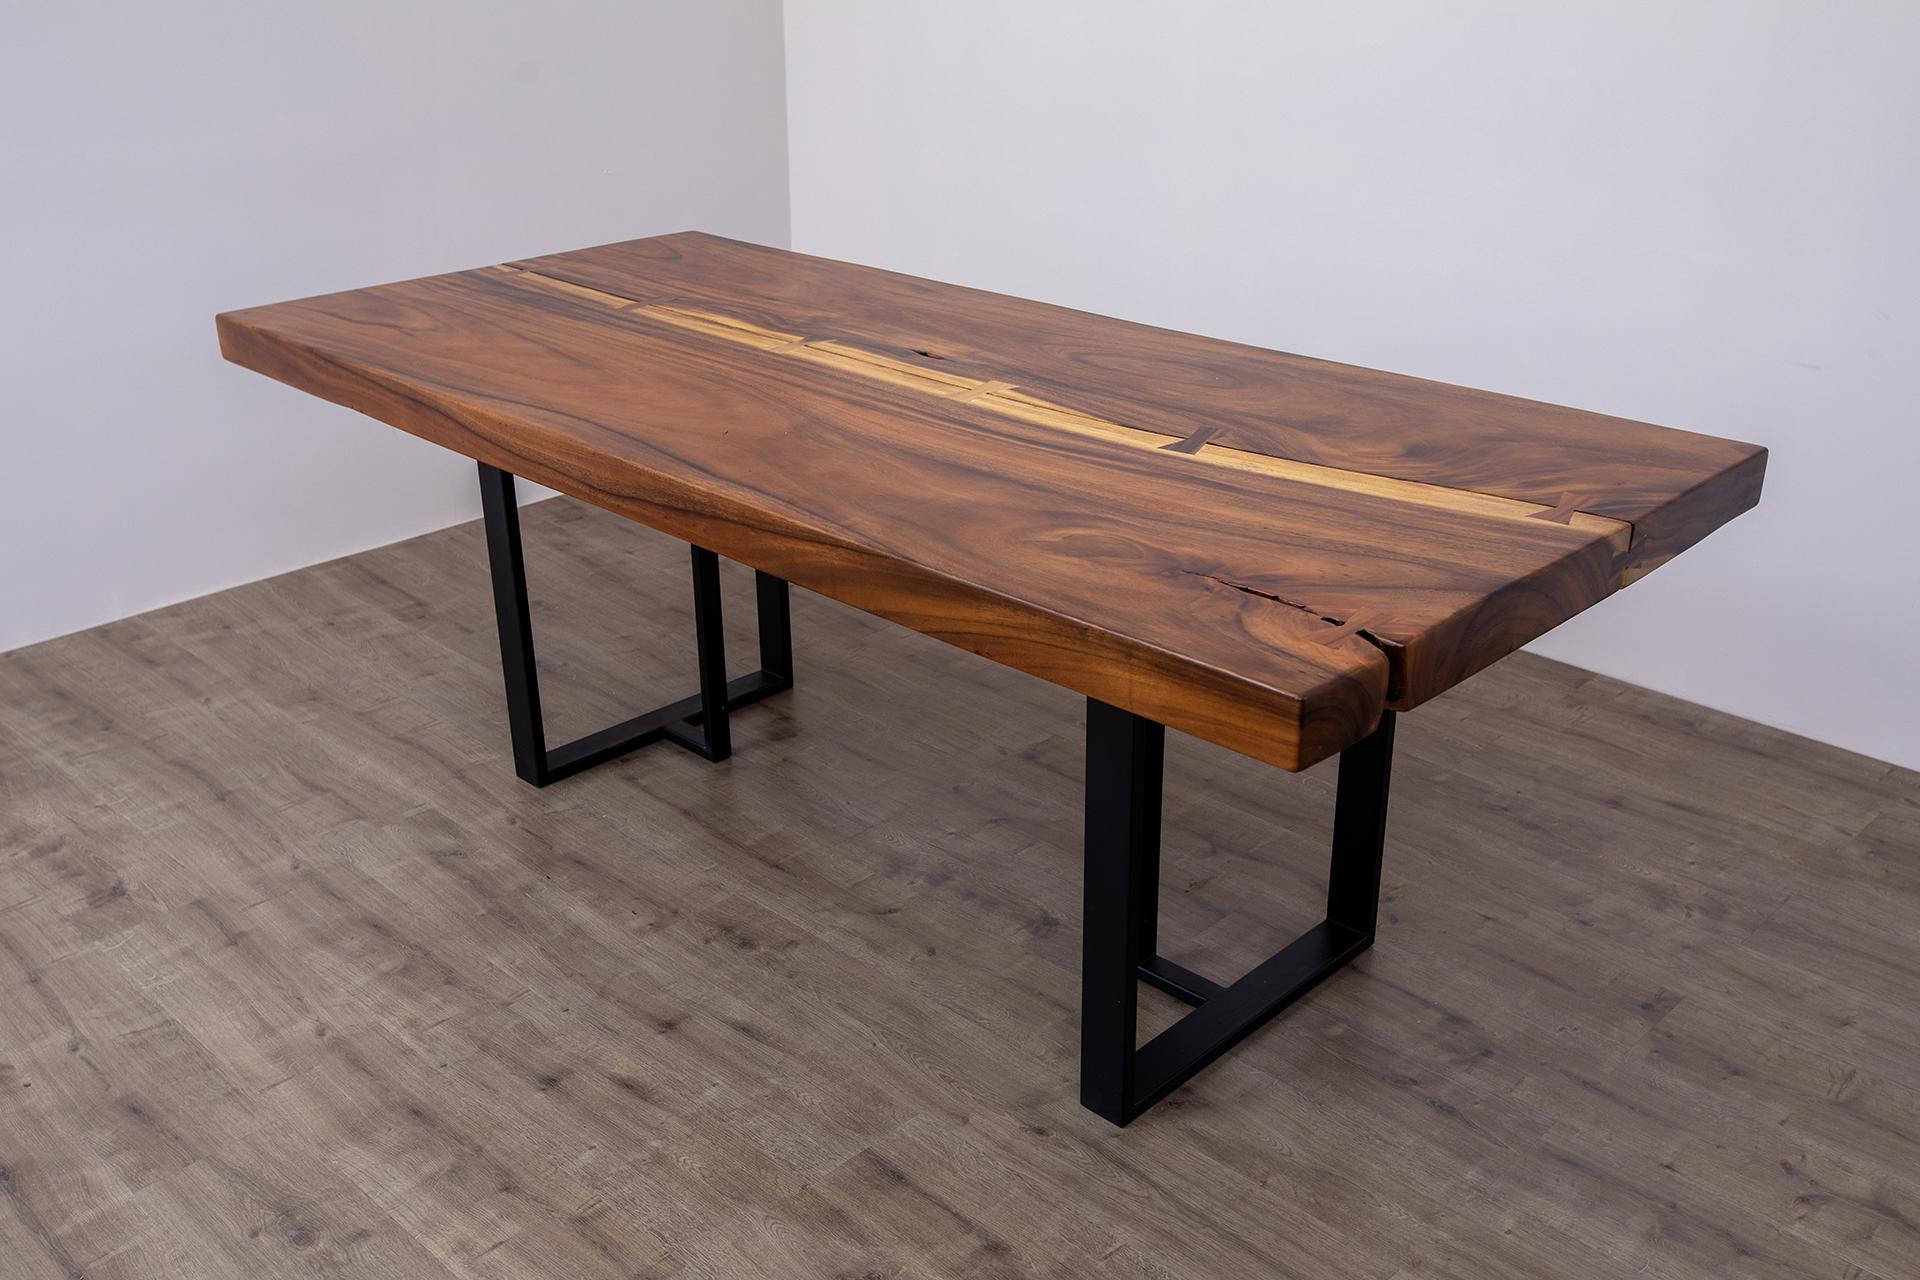 Hand-Crafted One-of-a-Kind Siam Walnut/Acacia Slab Table with Black Steel Legs